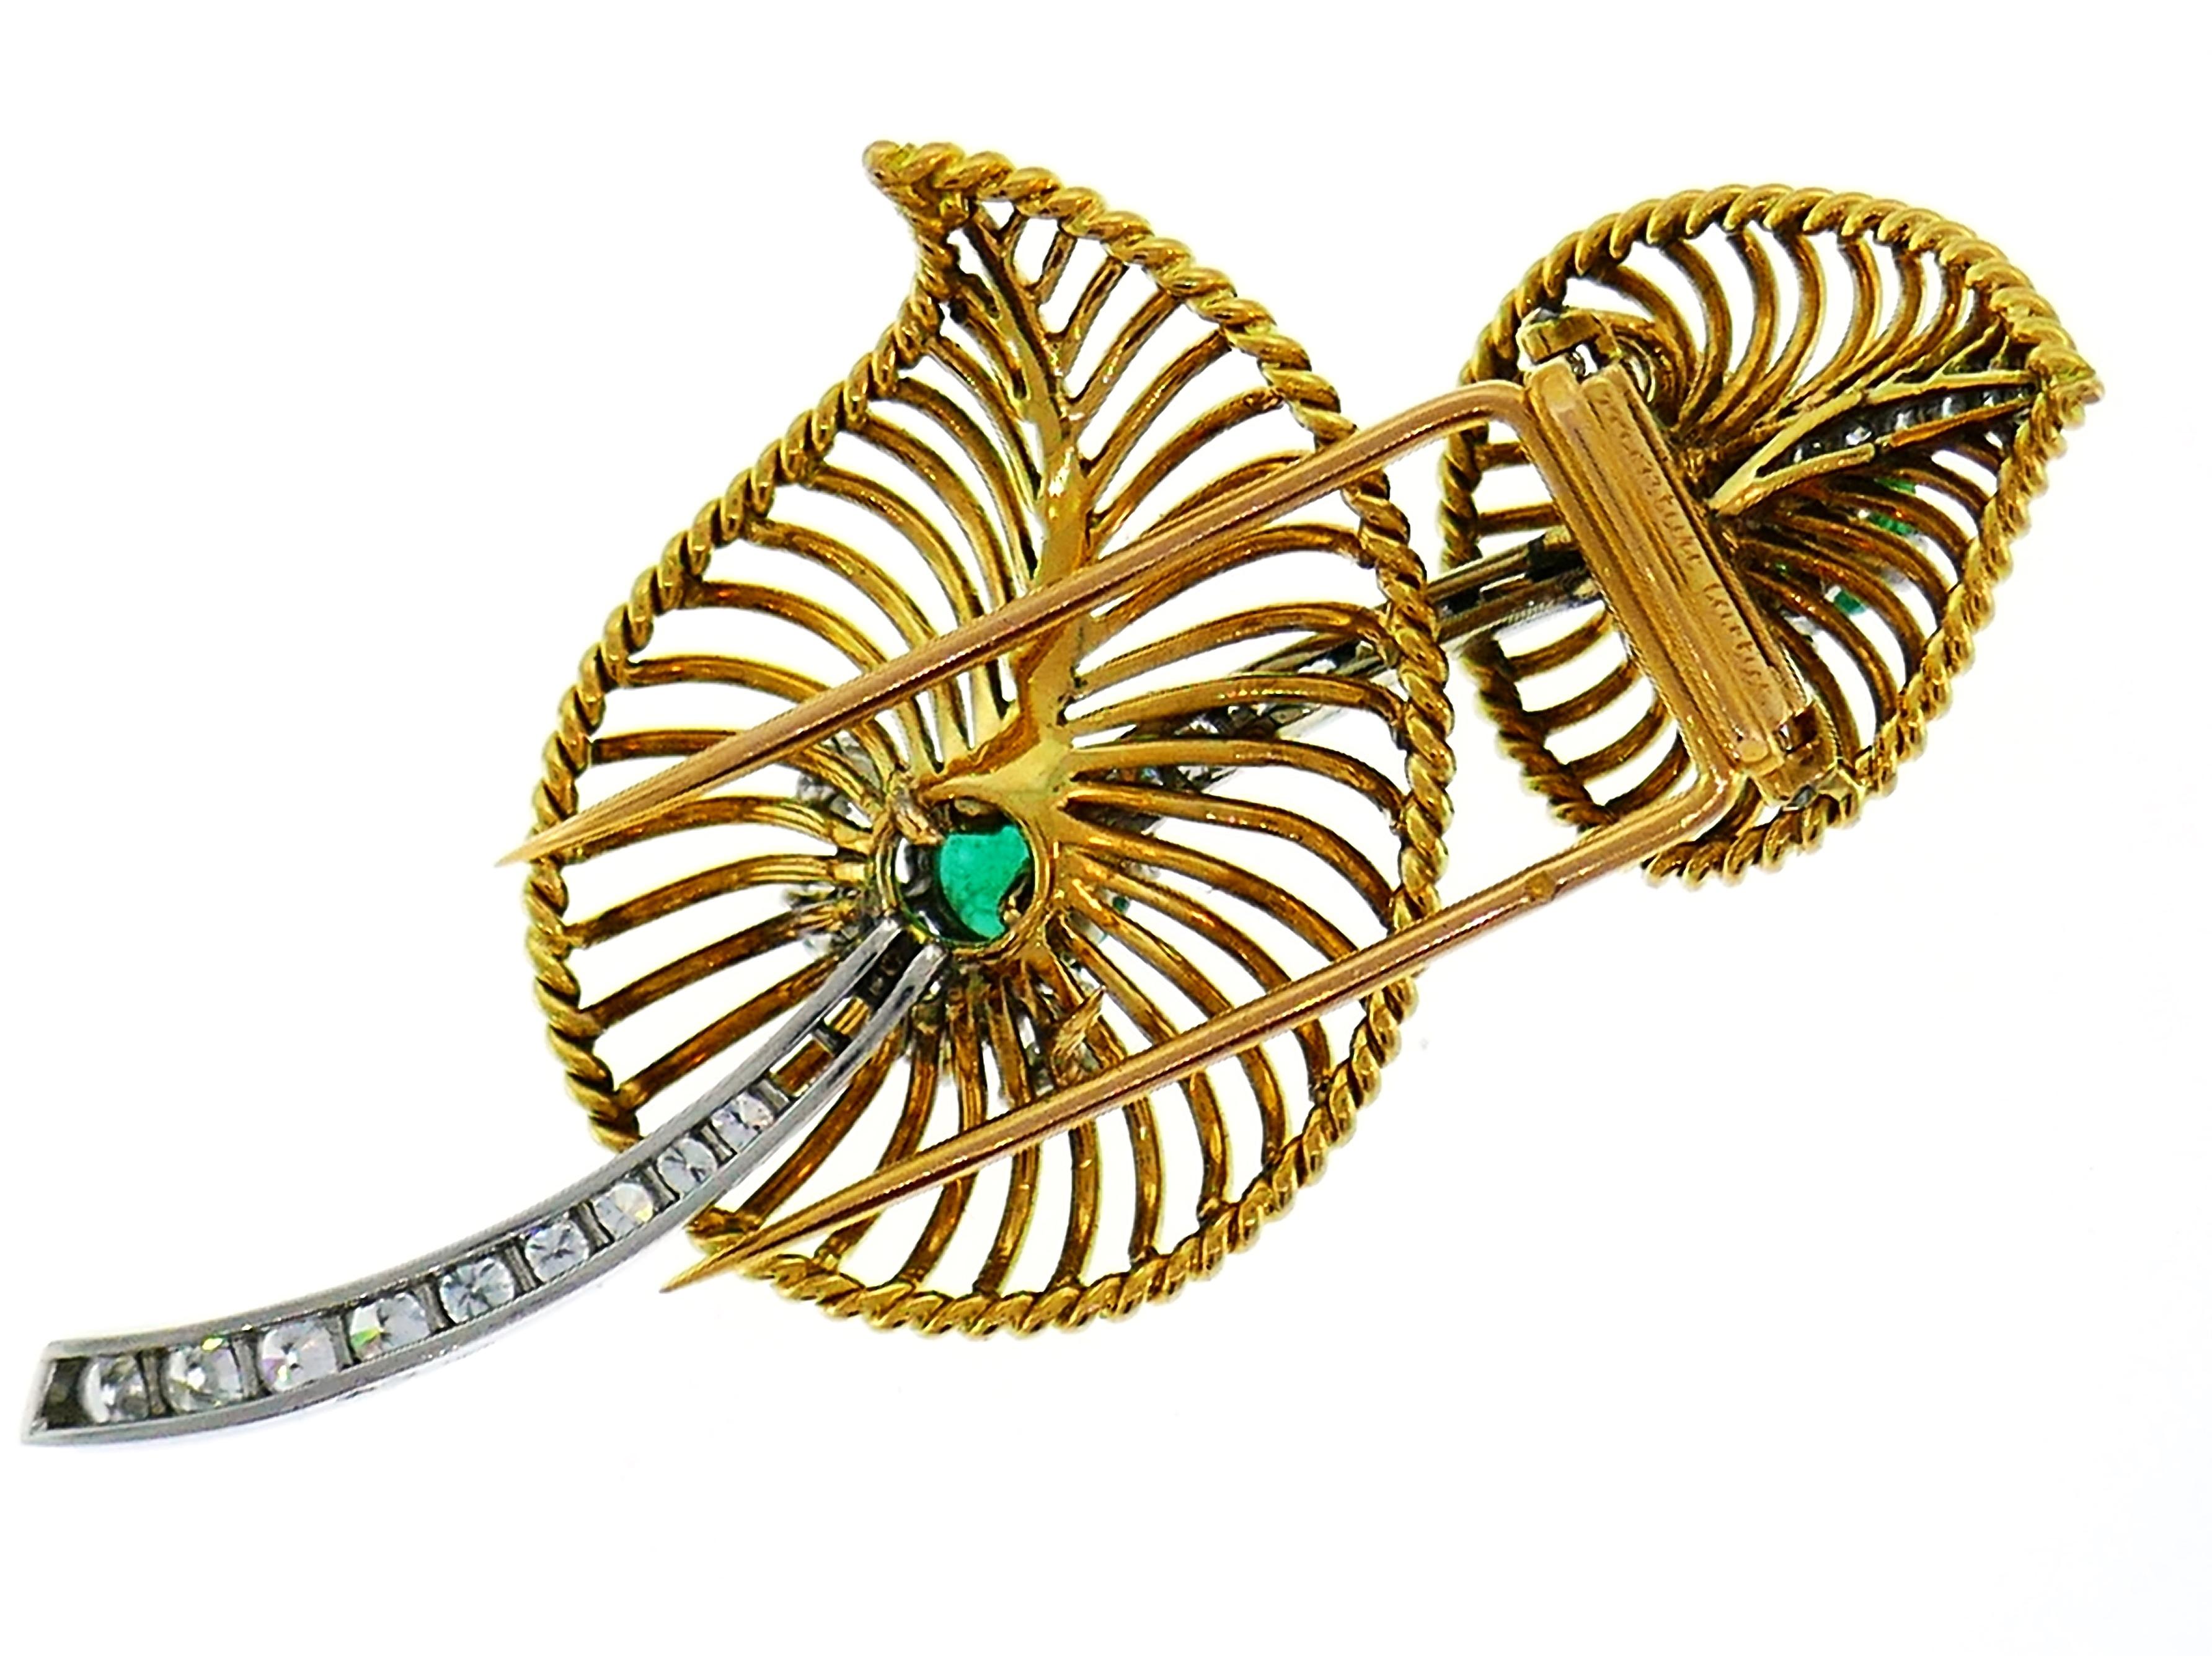 Elegant brooch created by Cartier in Paris in the 1950s. Chic and wearable, the clip is a great addition to your jewelry collection that will add a stylish touch to your outfit.
Made of 18 karat yellow gold and set with two round faceted emeralds